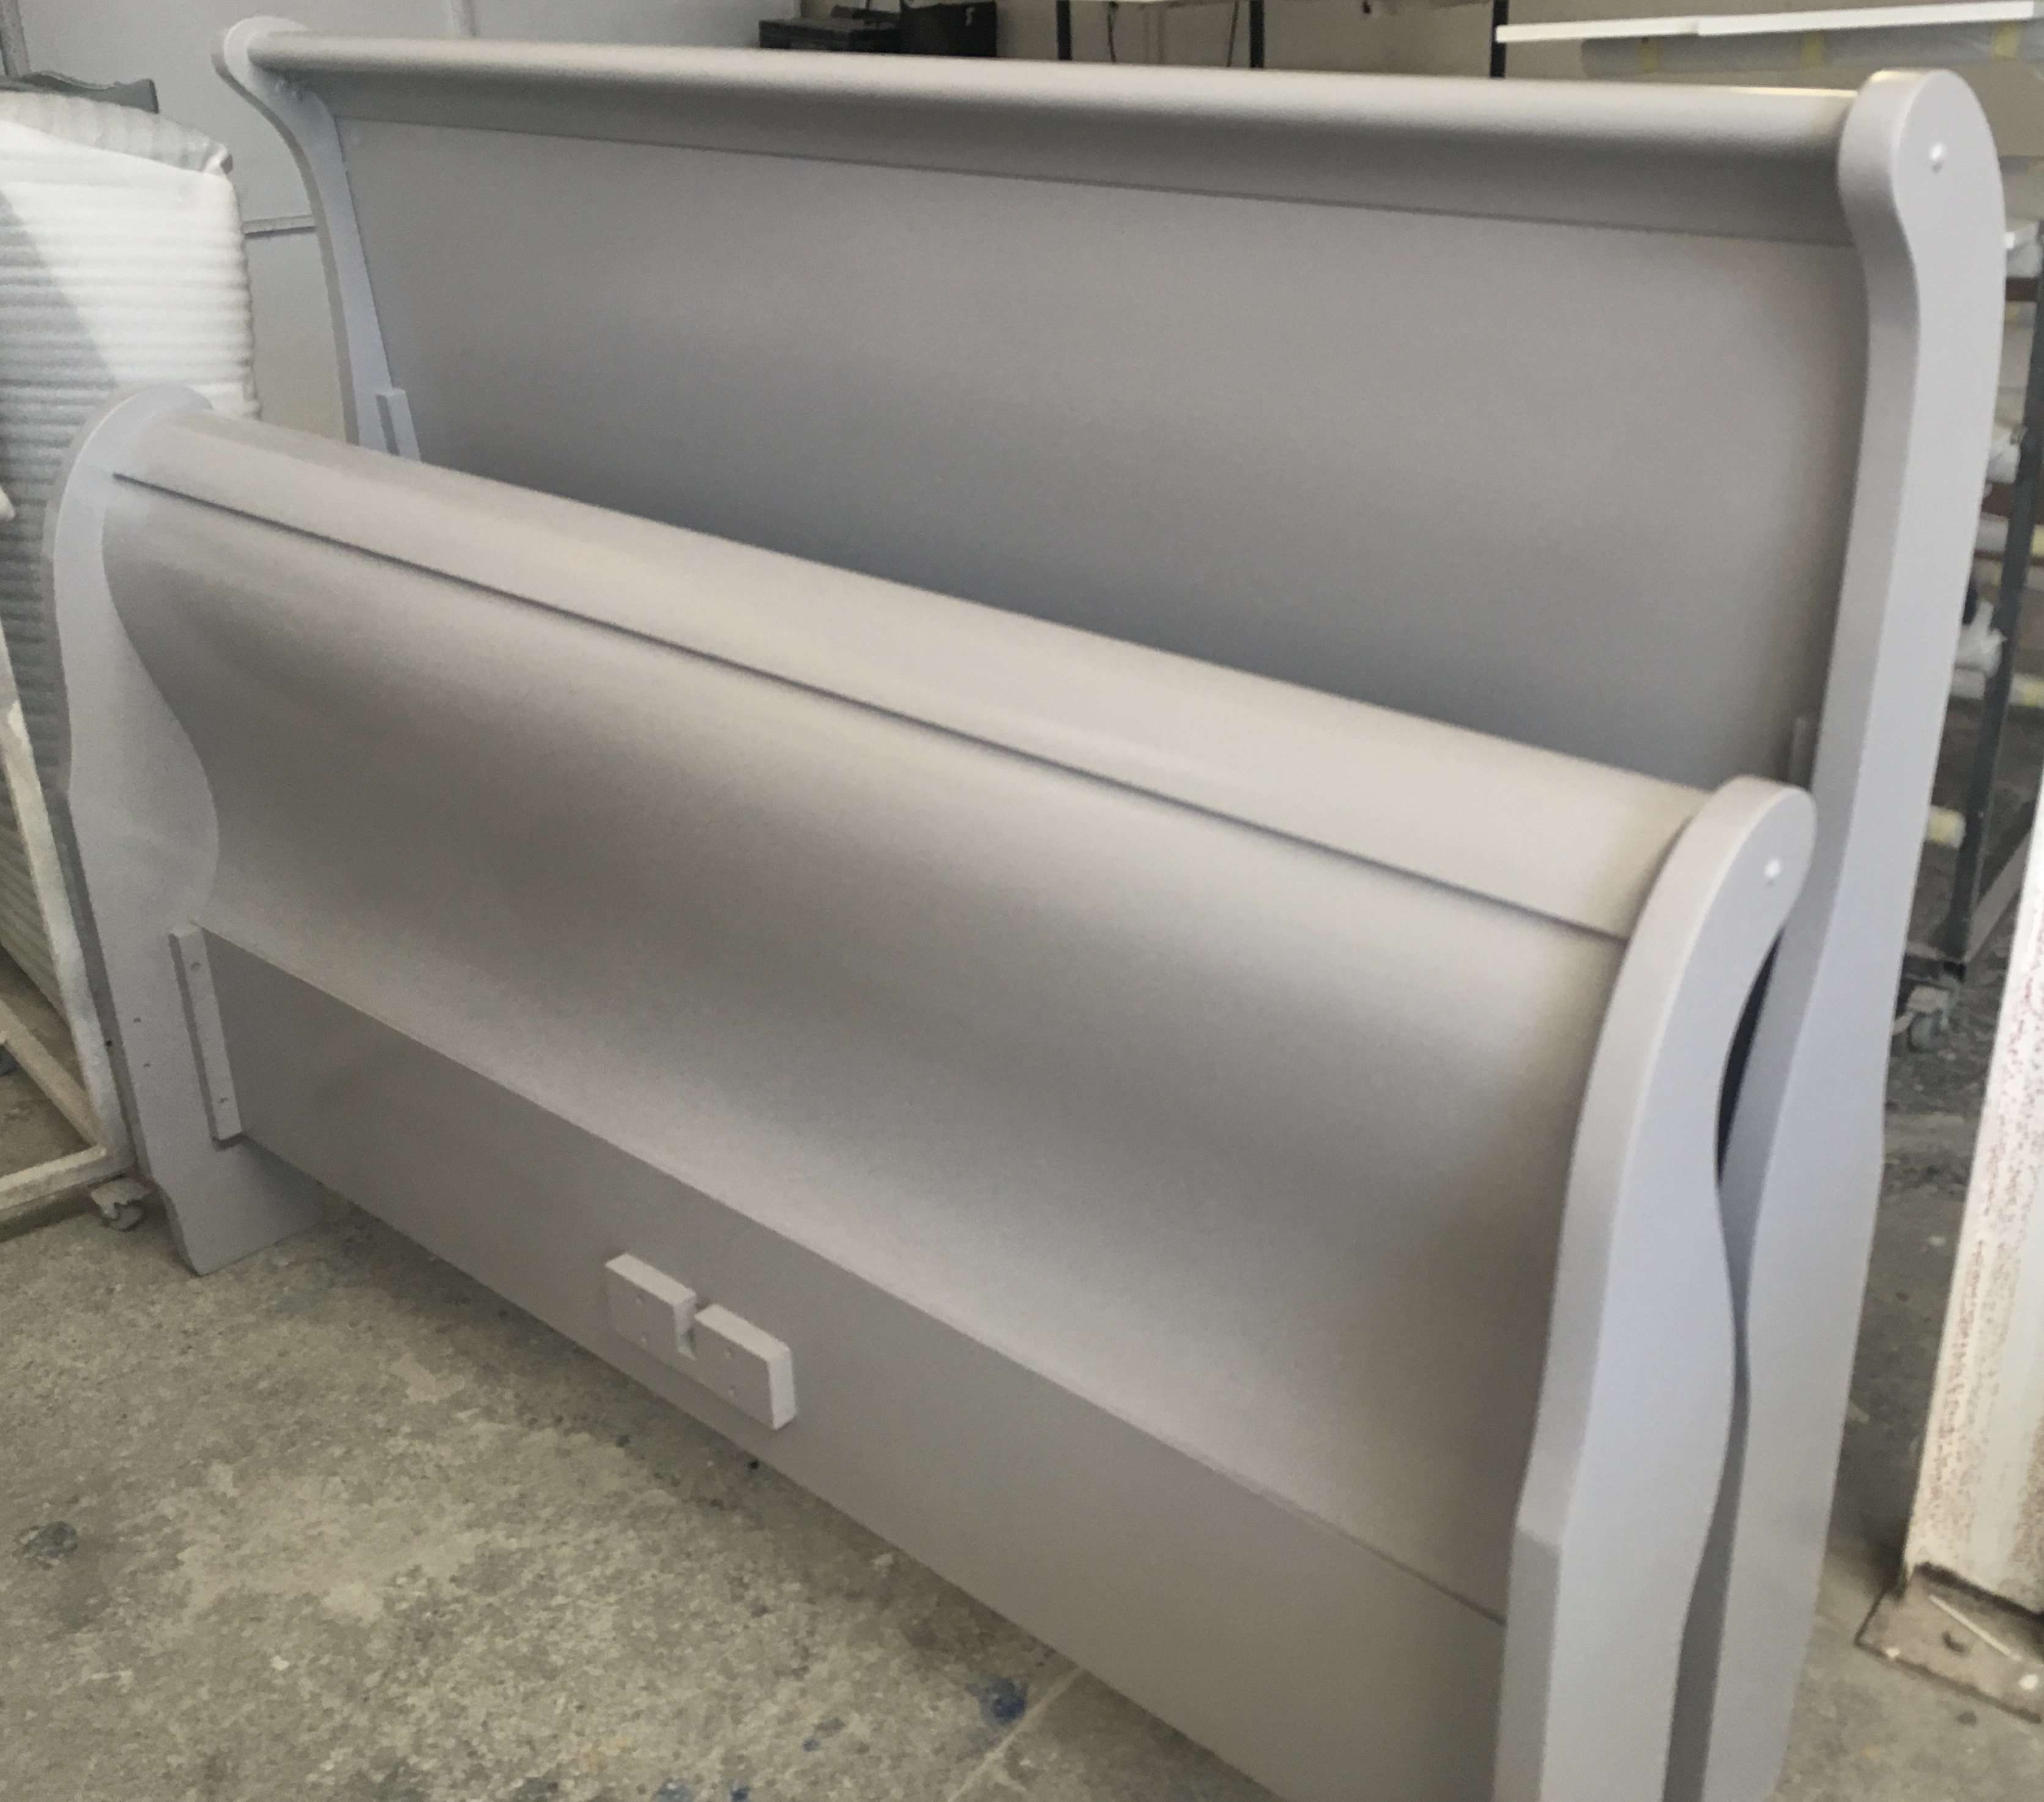 Sleigh bed goes from dark wood to grey